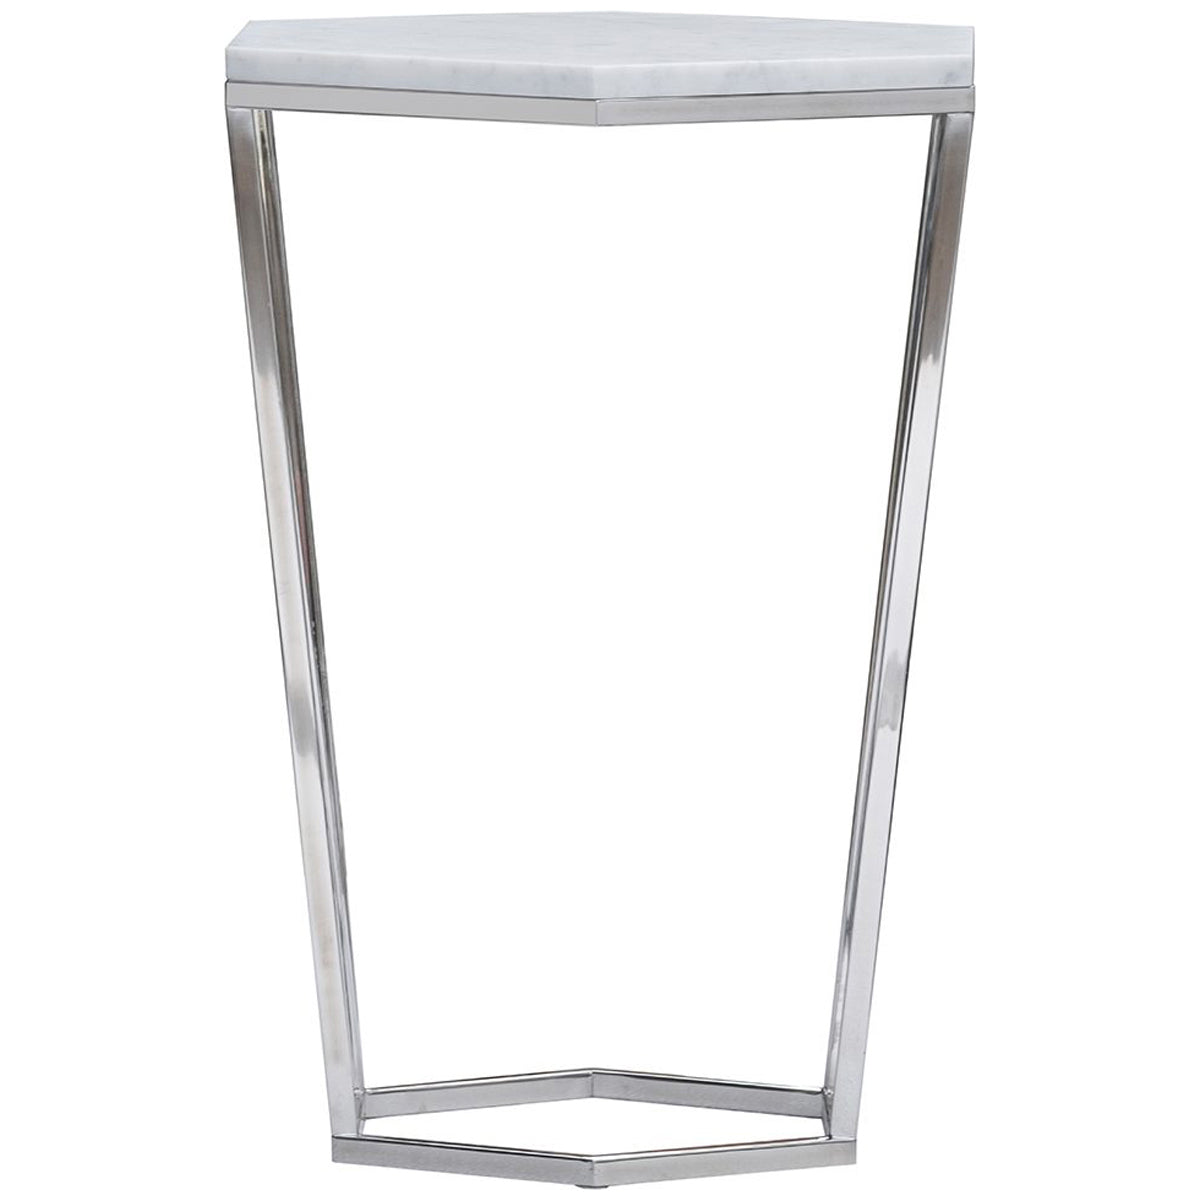 Lillian August Siesta Outdoor End Table